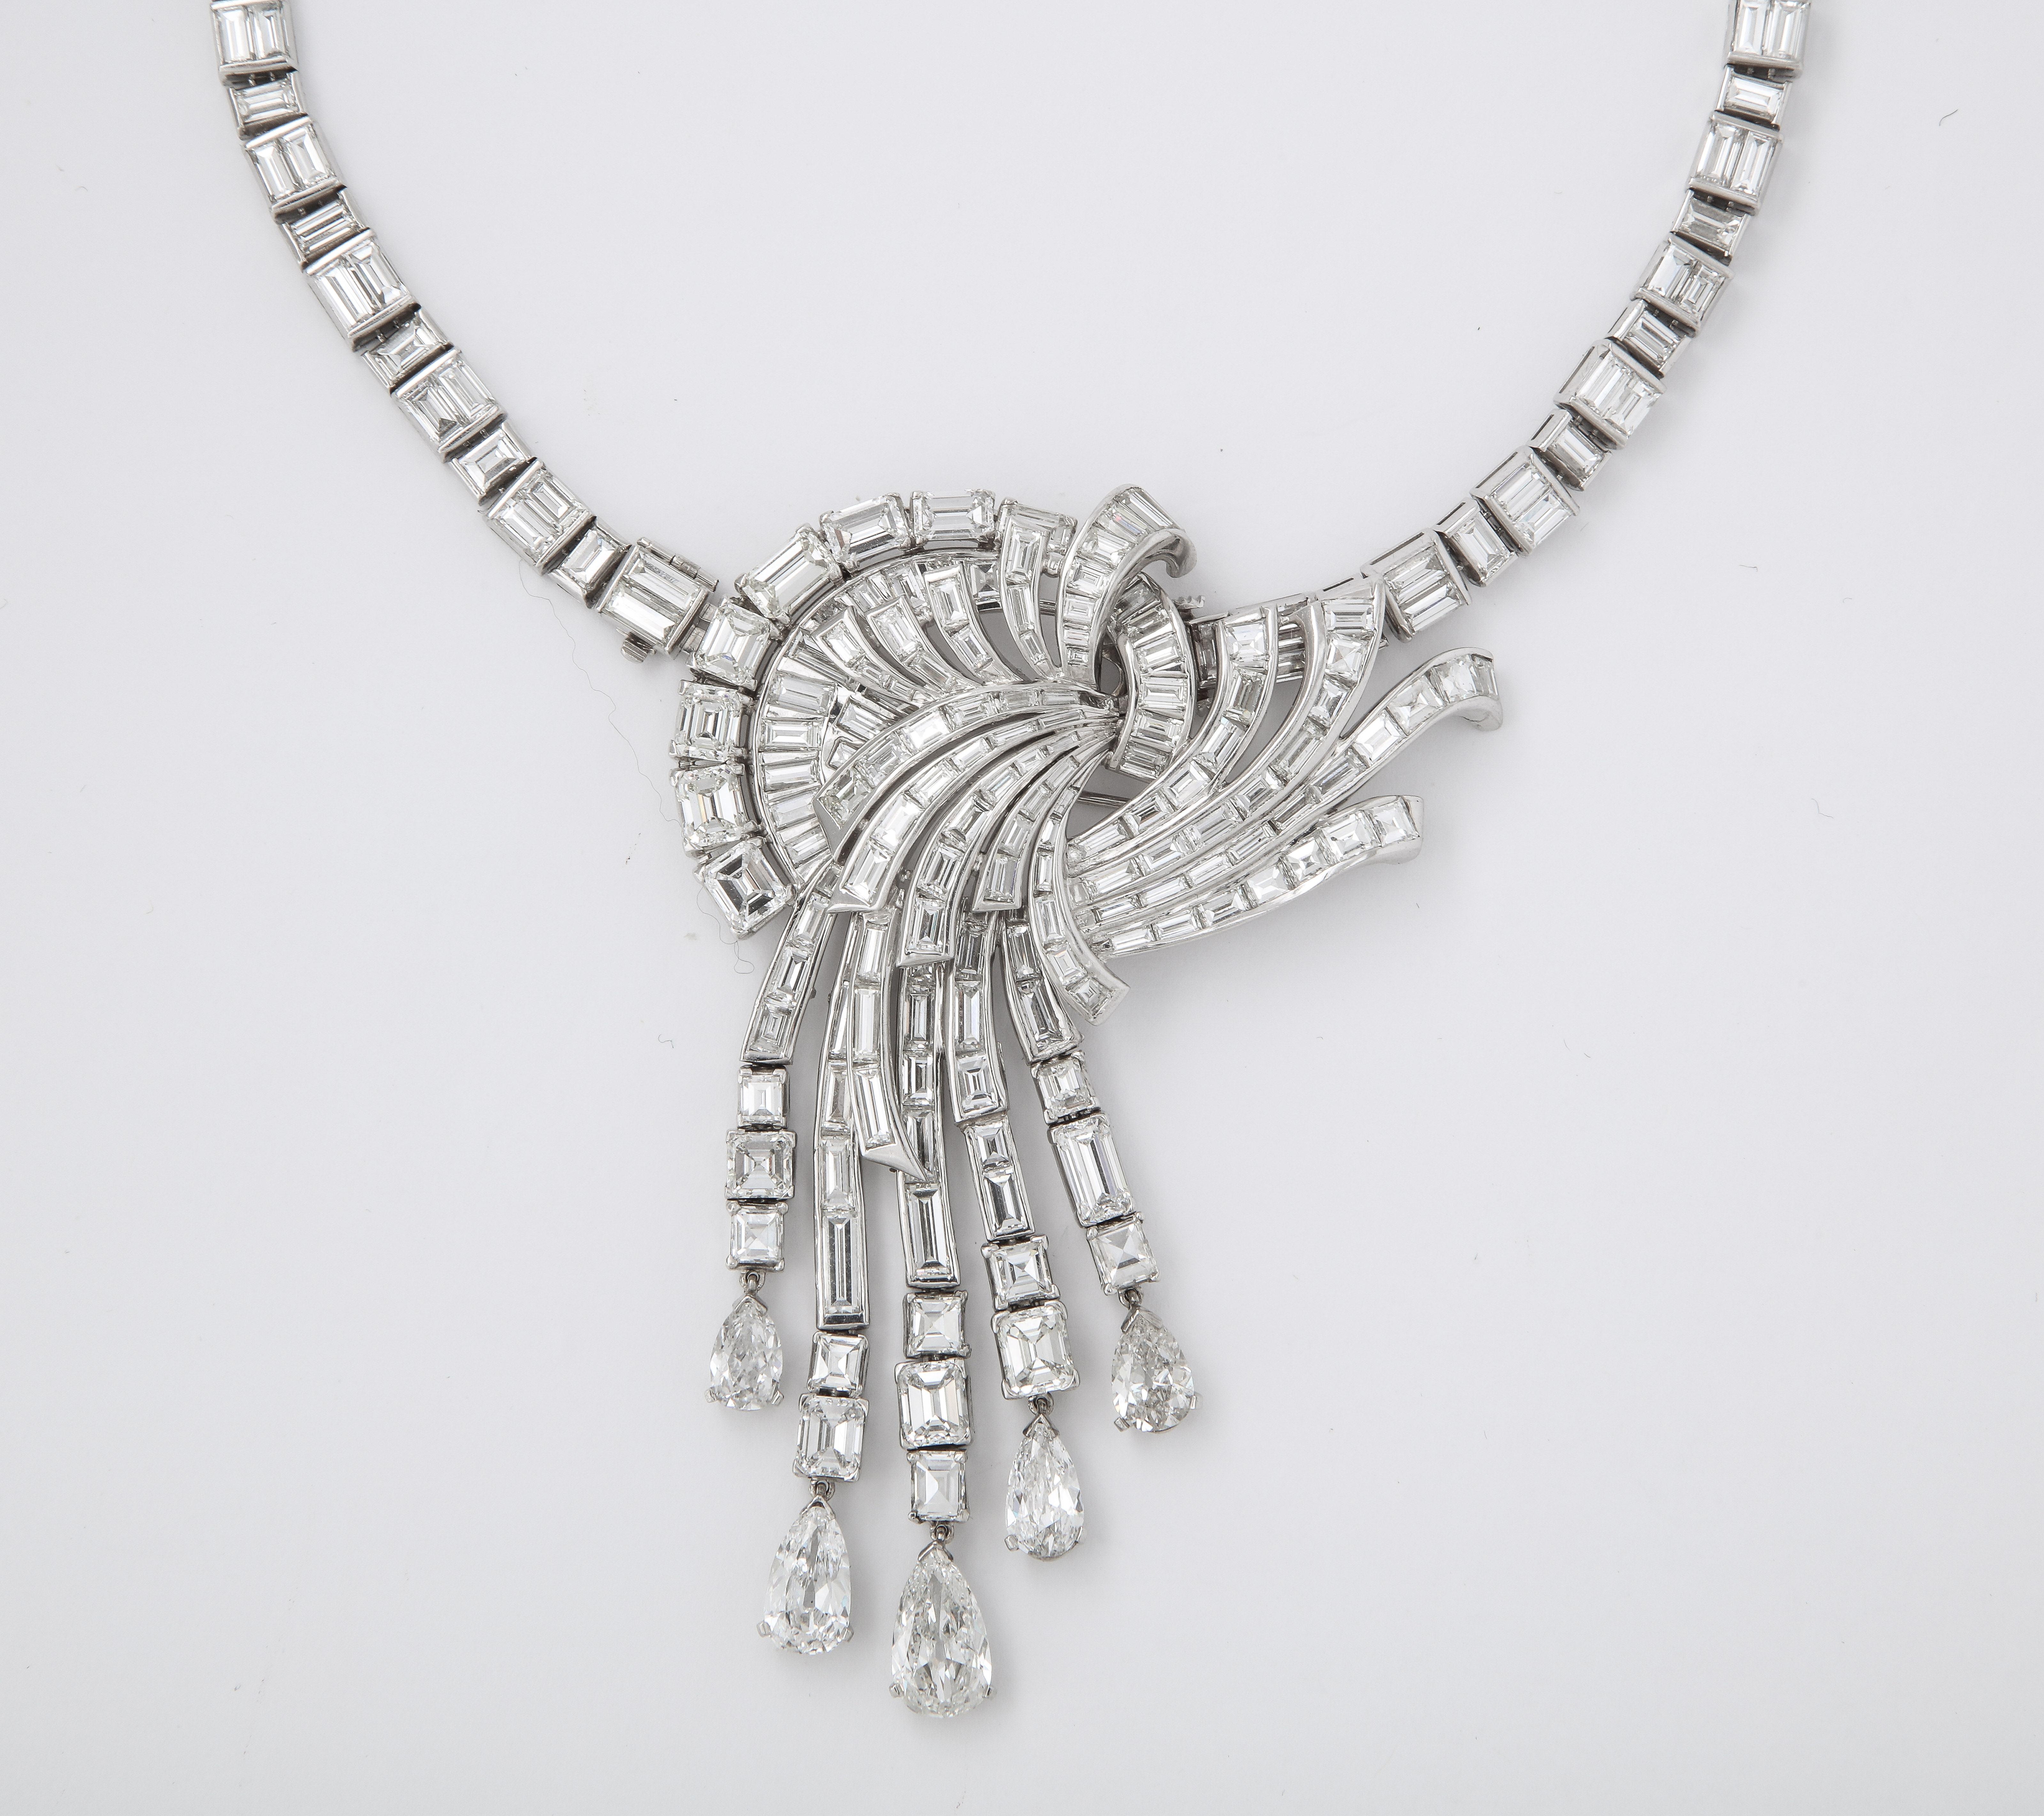 Important Diamond Cascade Necklace

Made Circa 1950

Converts into two bracelets & a brooch.

Total Diamond Weight: 54.45 CT
1st Bracelet Measurements: 7” long
2nd Bracelet Measurements: 8” long
Brooch measurements: 3.75” long 

